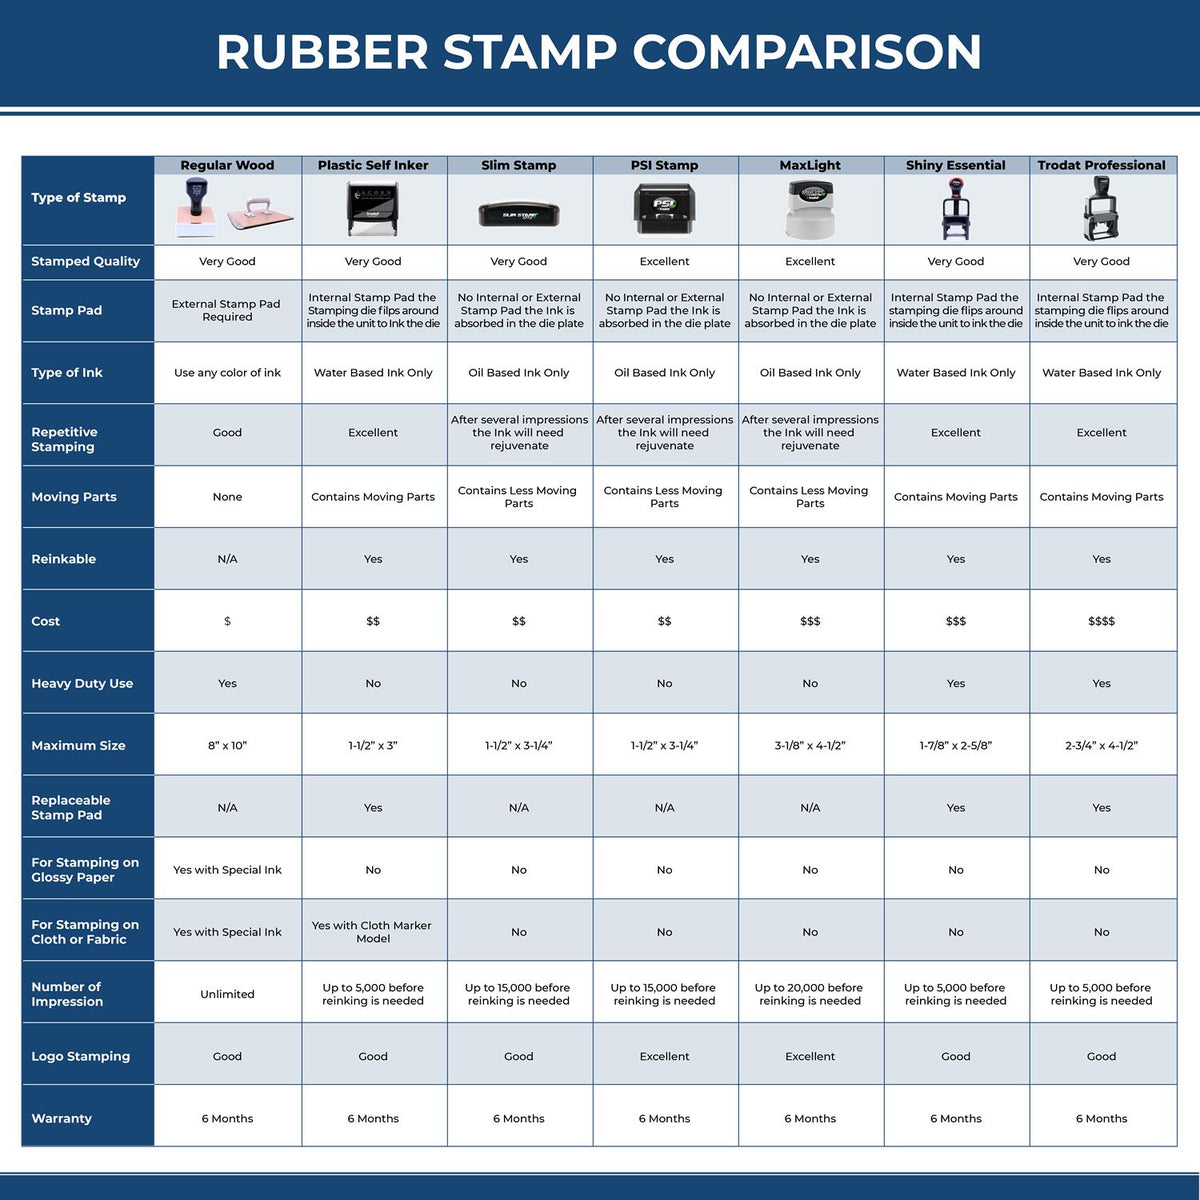 A comparison chart for the different types of mount models available for the Self-Inking Arizona PE Stamp.